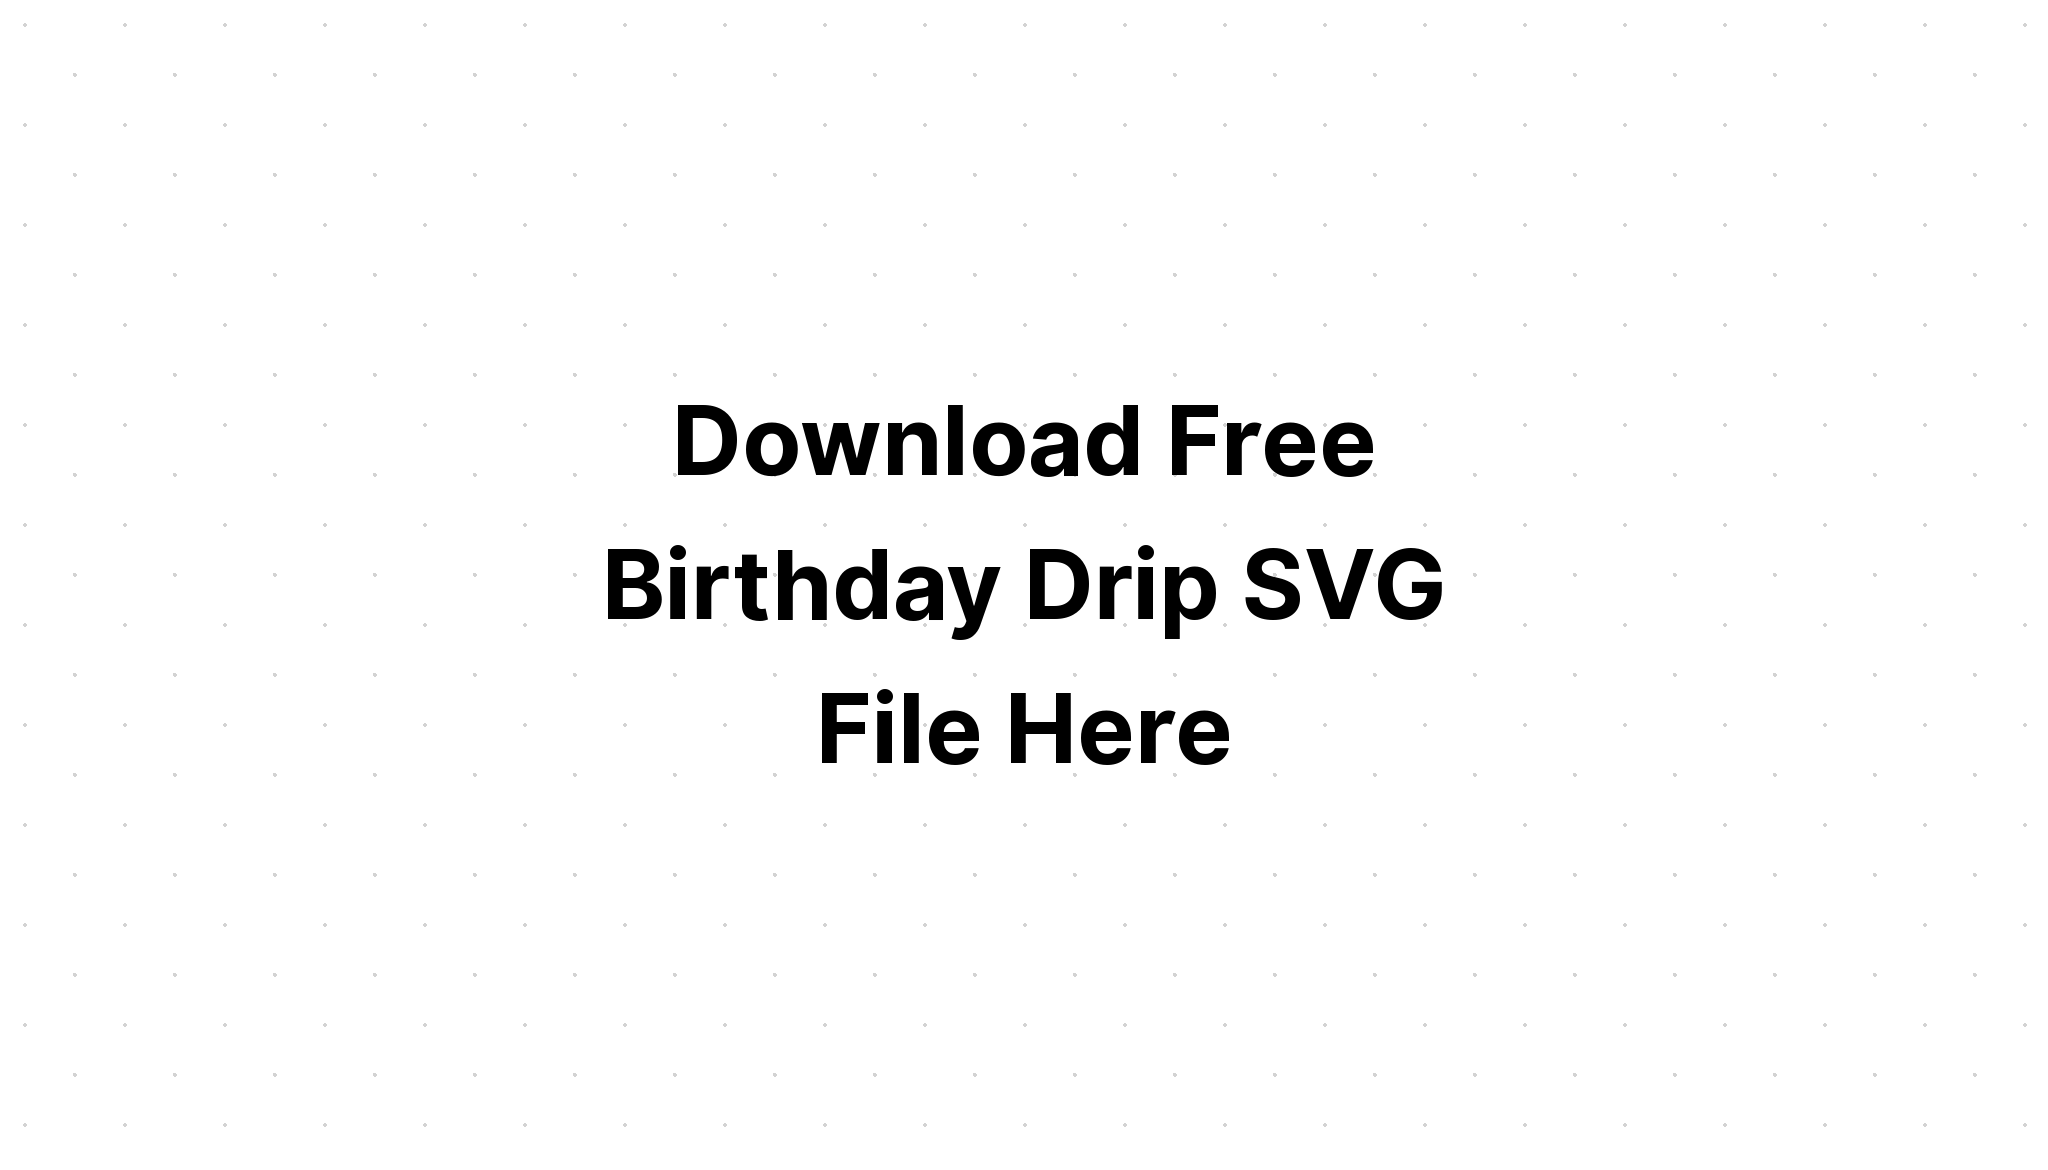 Download Create Birthday Drip Crafter File Svg